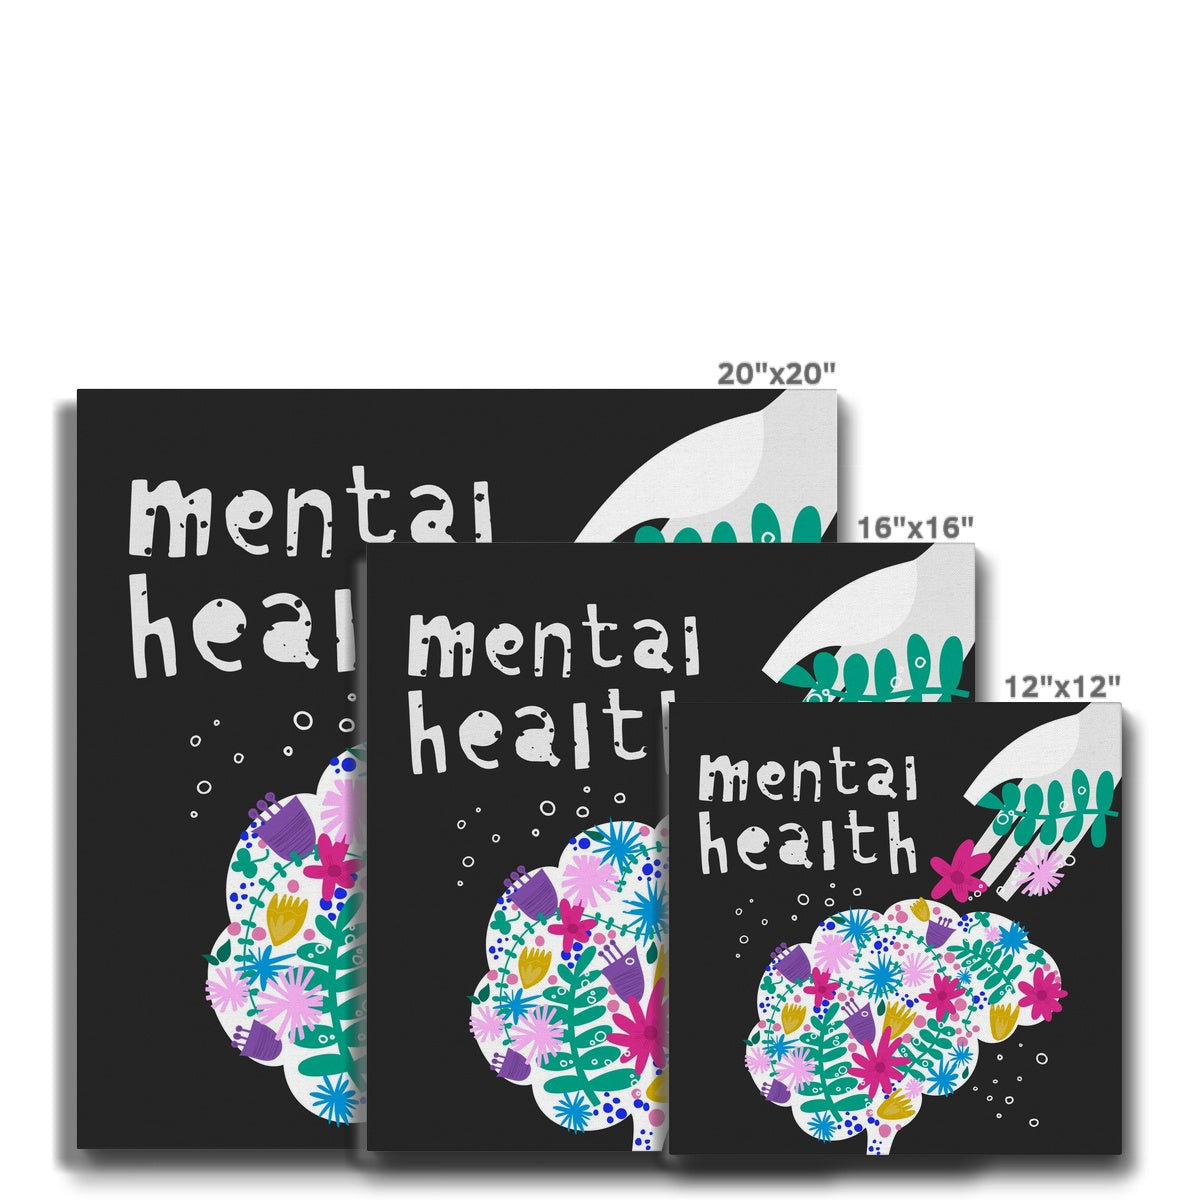 "Mental Health" Brain With Flowers Illustration Canvas